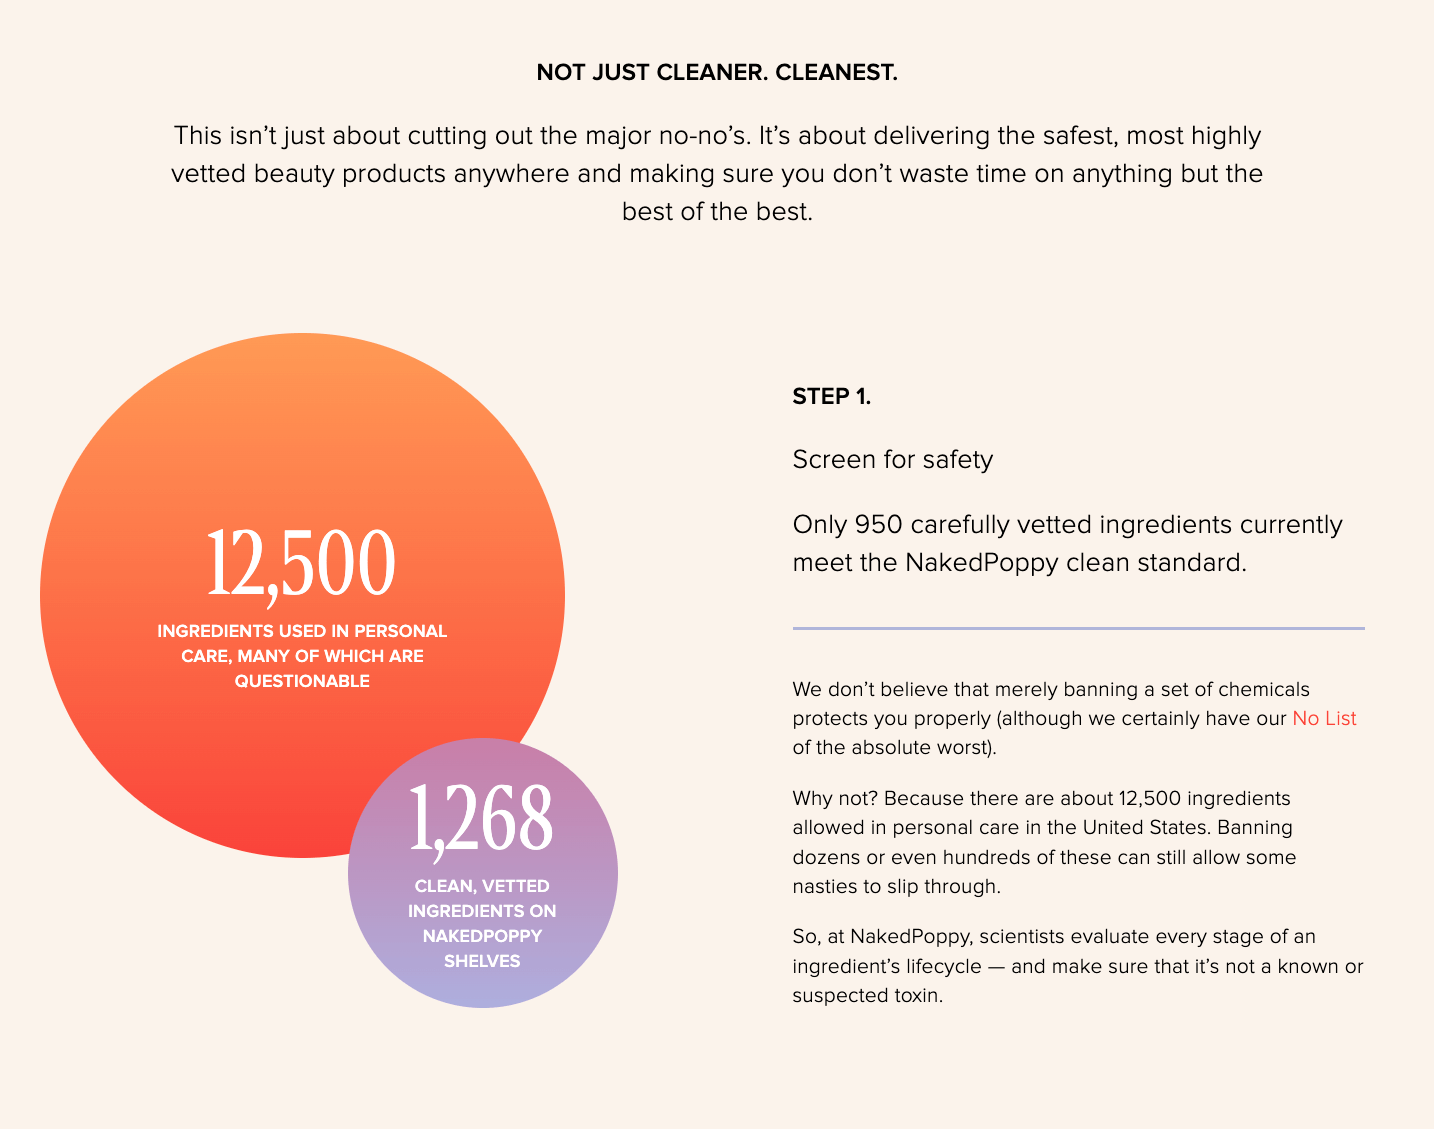 From the NakedPoppy About Us page, a graphic showing the difference between clean vetted ingredients that NakedPoppy uses (1,268 of them), and the questionable ingredients used by other brands (12,500 of them)